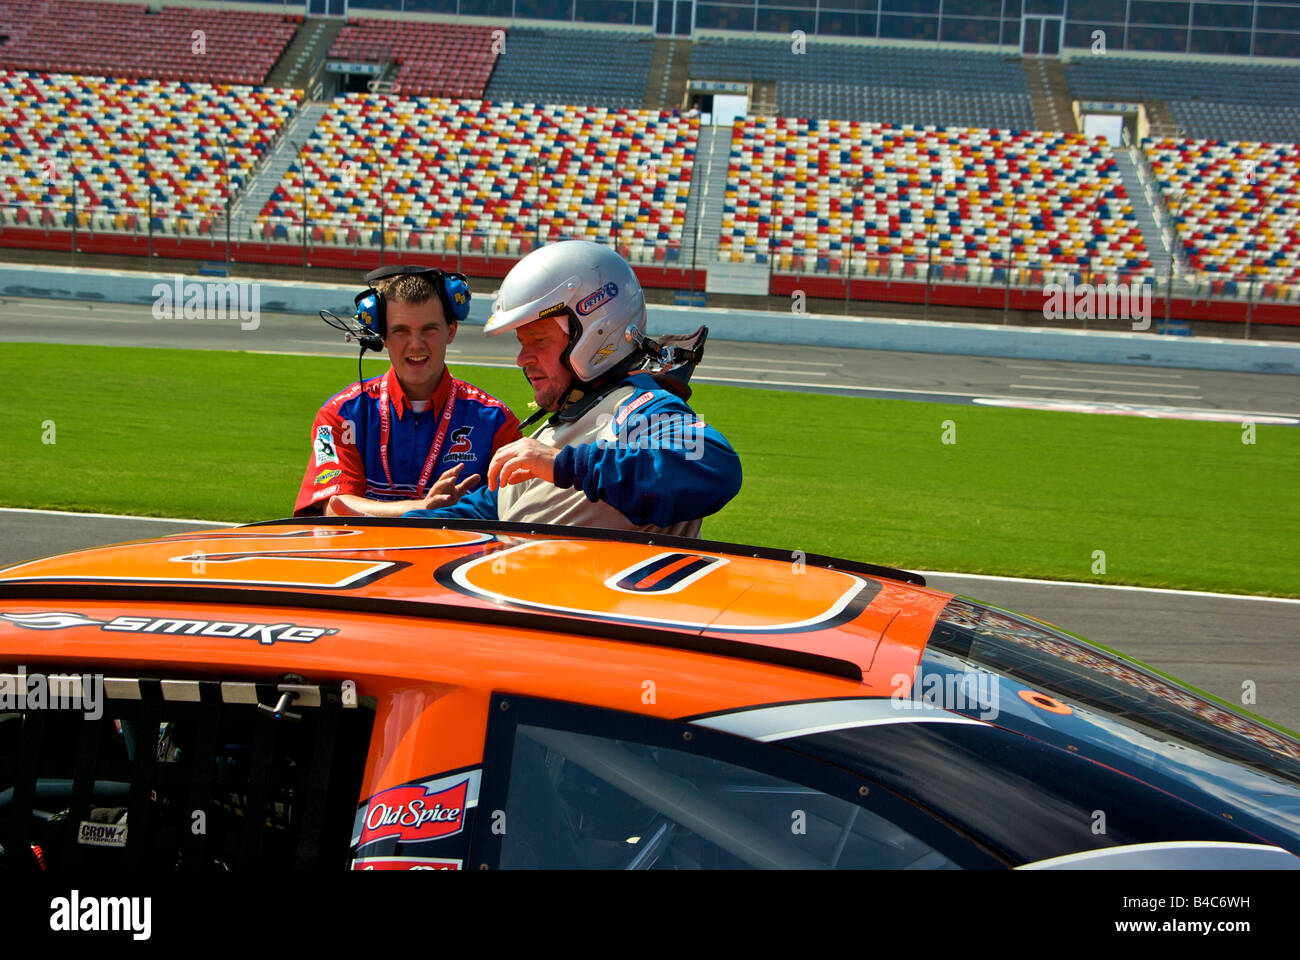 Stock car racing fan getting out after three laps riding in a Richard Petty Driving Experience NASCAR style racecar Stock Photo